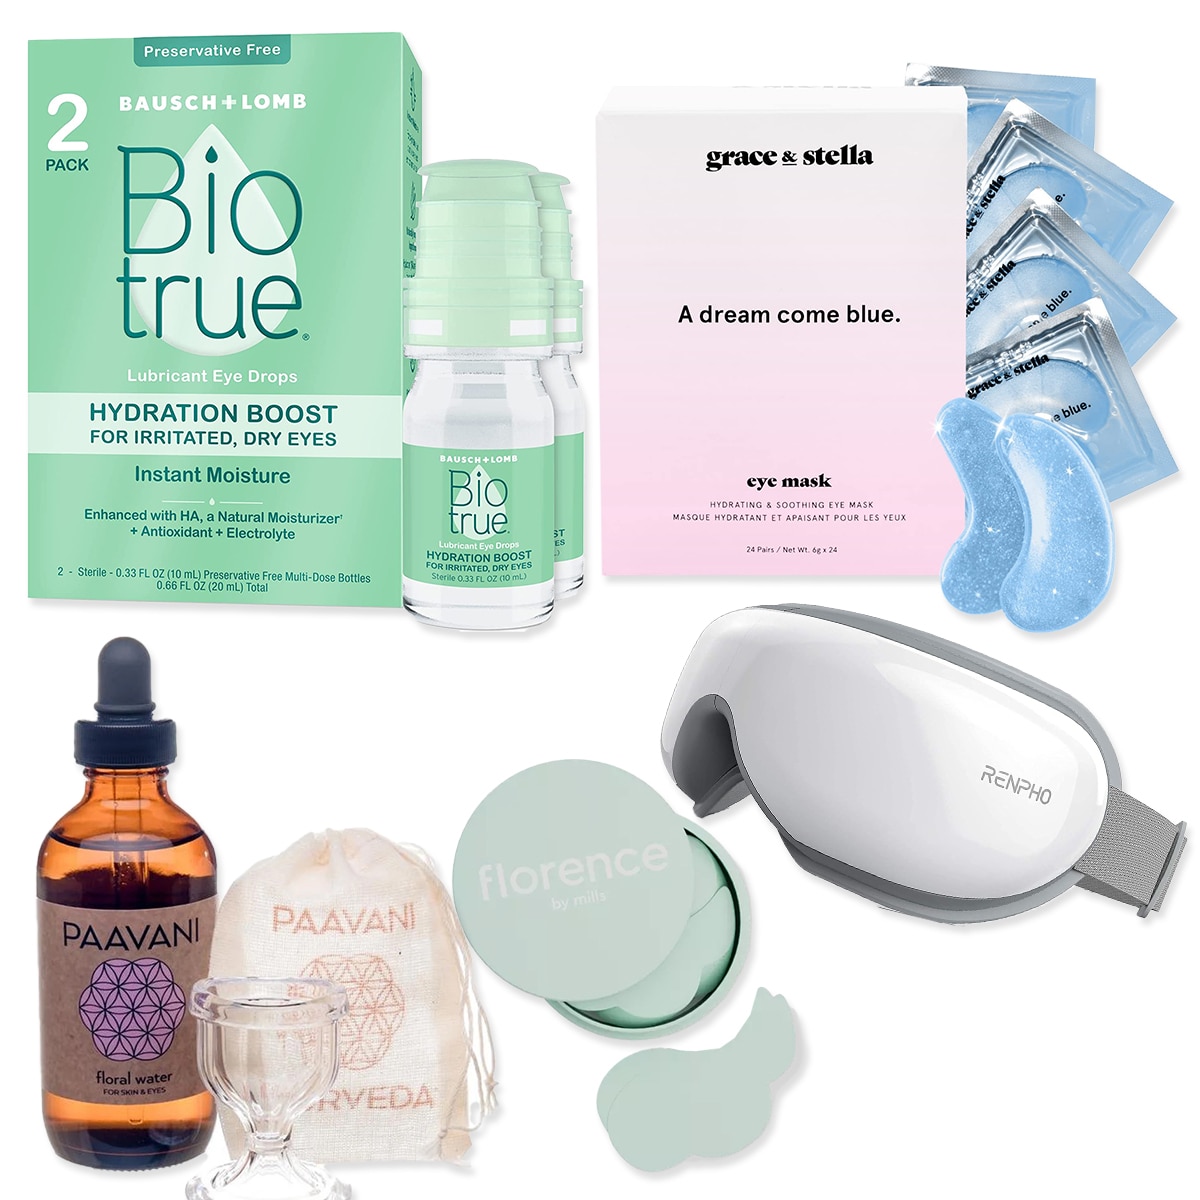 E-comm: Products To Help With Dry Eyes